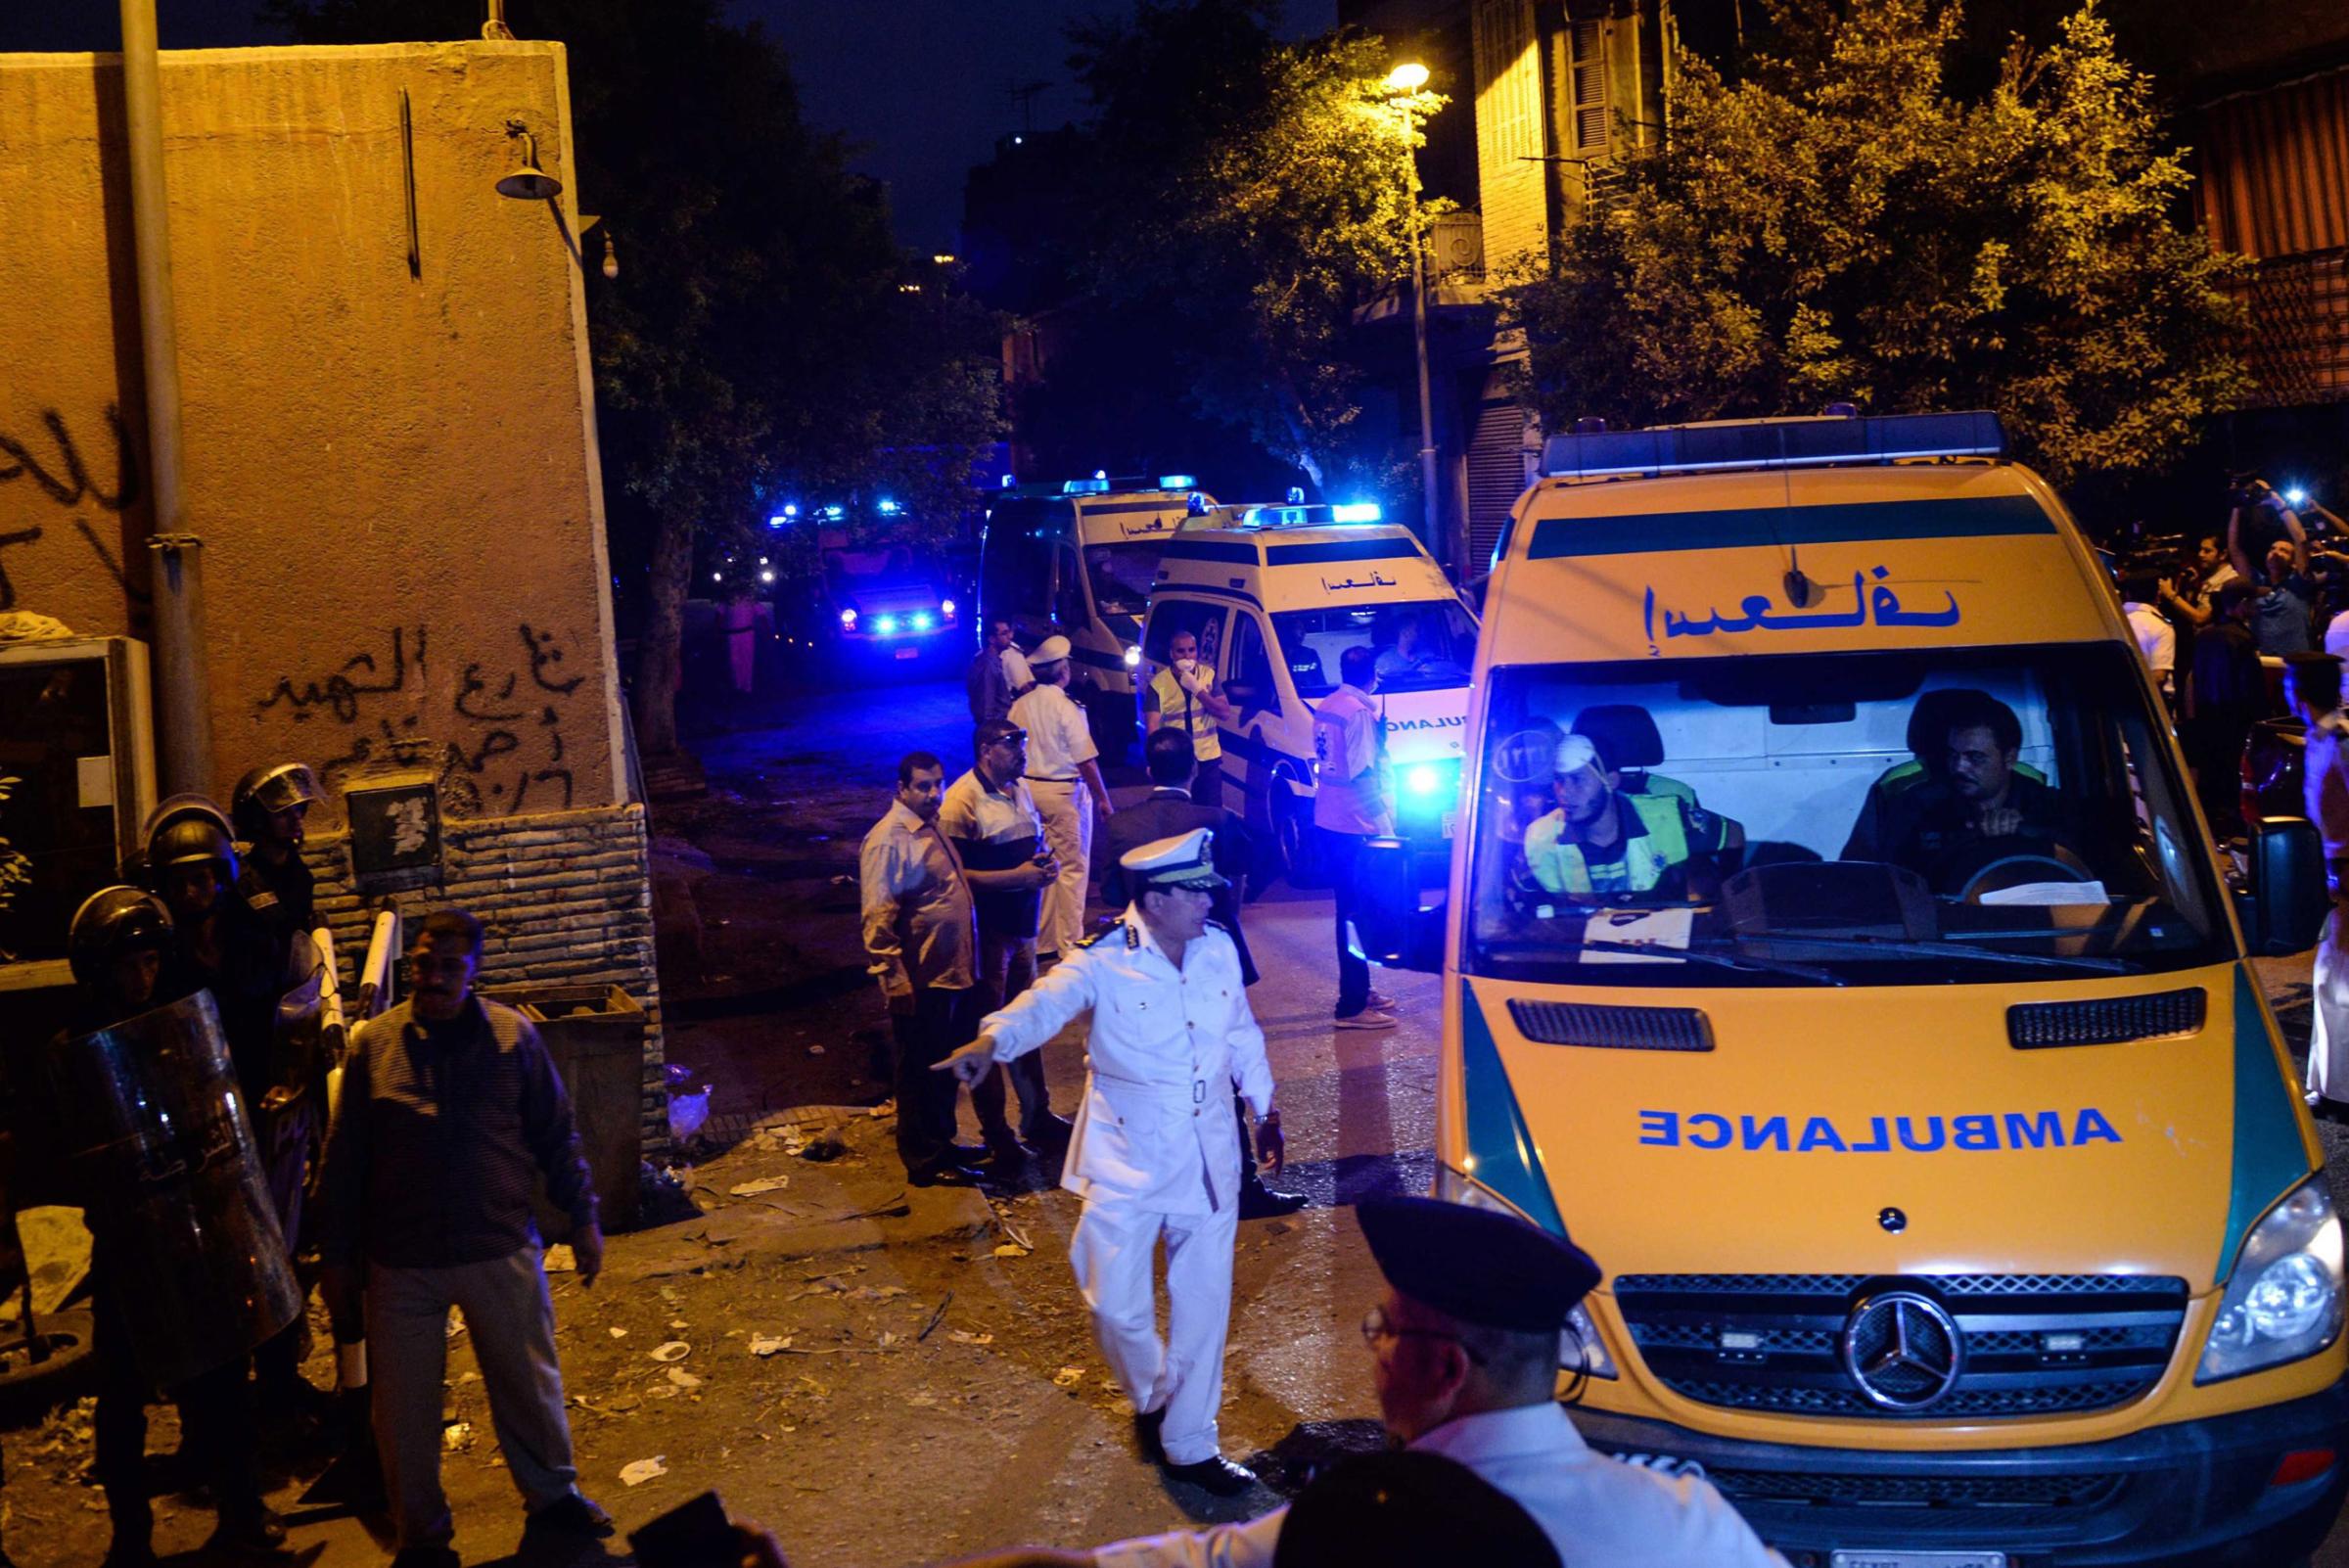 epa05004879 Ambulances transporting the bodies of the victims of the Russian passenger flight crash arrive at the Zeinhom morgue, Cairo, Egypt, 31 October 2015. According to reports the Egyptian Government has dispatched more than 45 ambulances to the crash site of the Kogalymavia Metrojet Russian passenger jet, which disappeared from raider after requesting an emergency landing early 31 October, crashing in the mountainous al-Hasanah area of central Sinai. The black box has been recovered at the site. Authorities believe all onboard perished in the crash. EPA/MOHAMMED HOSSAM